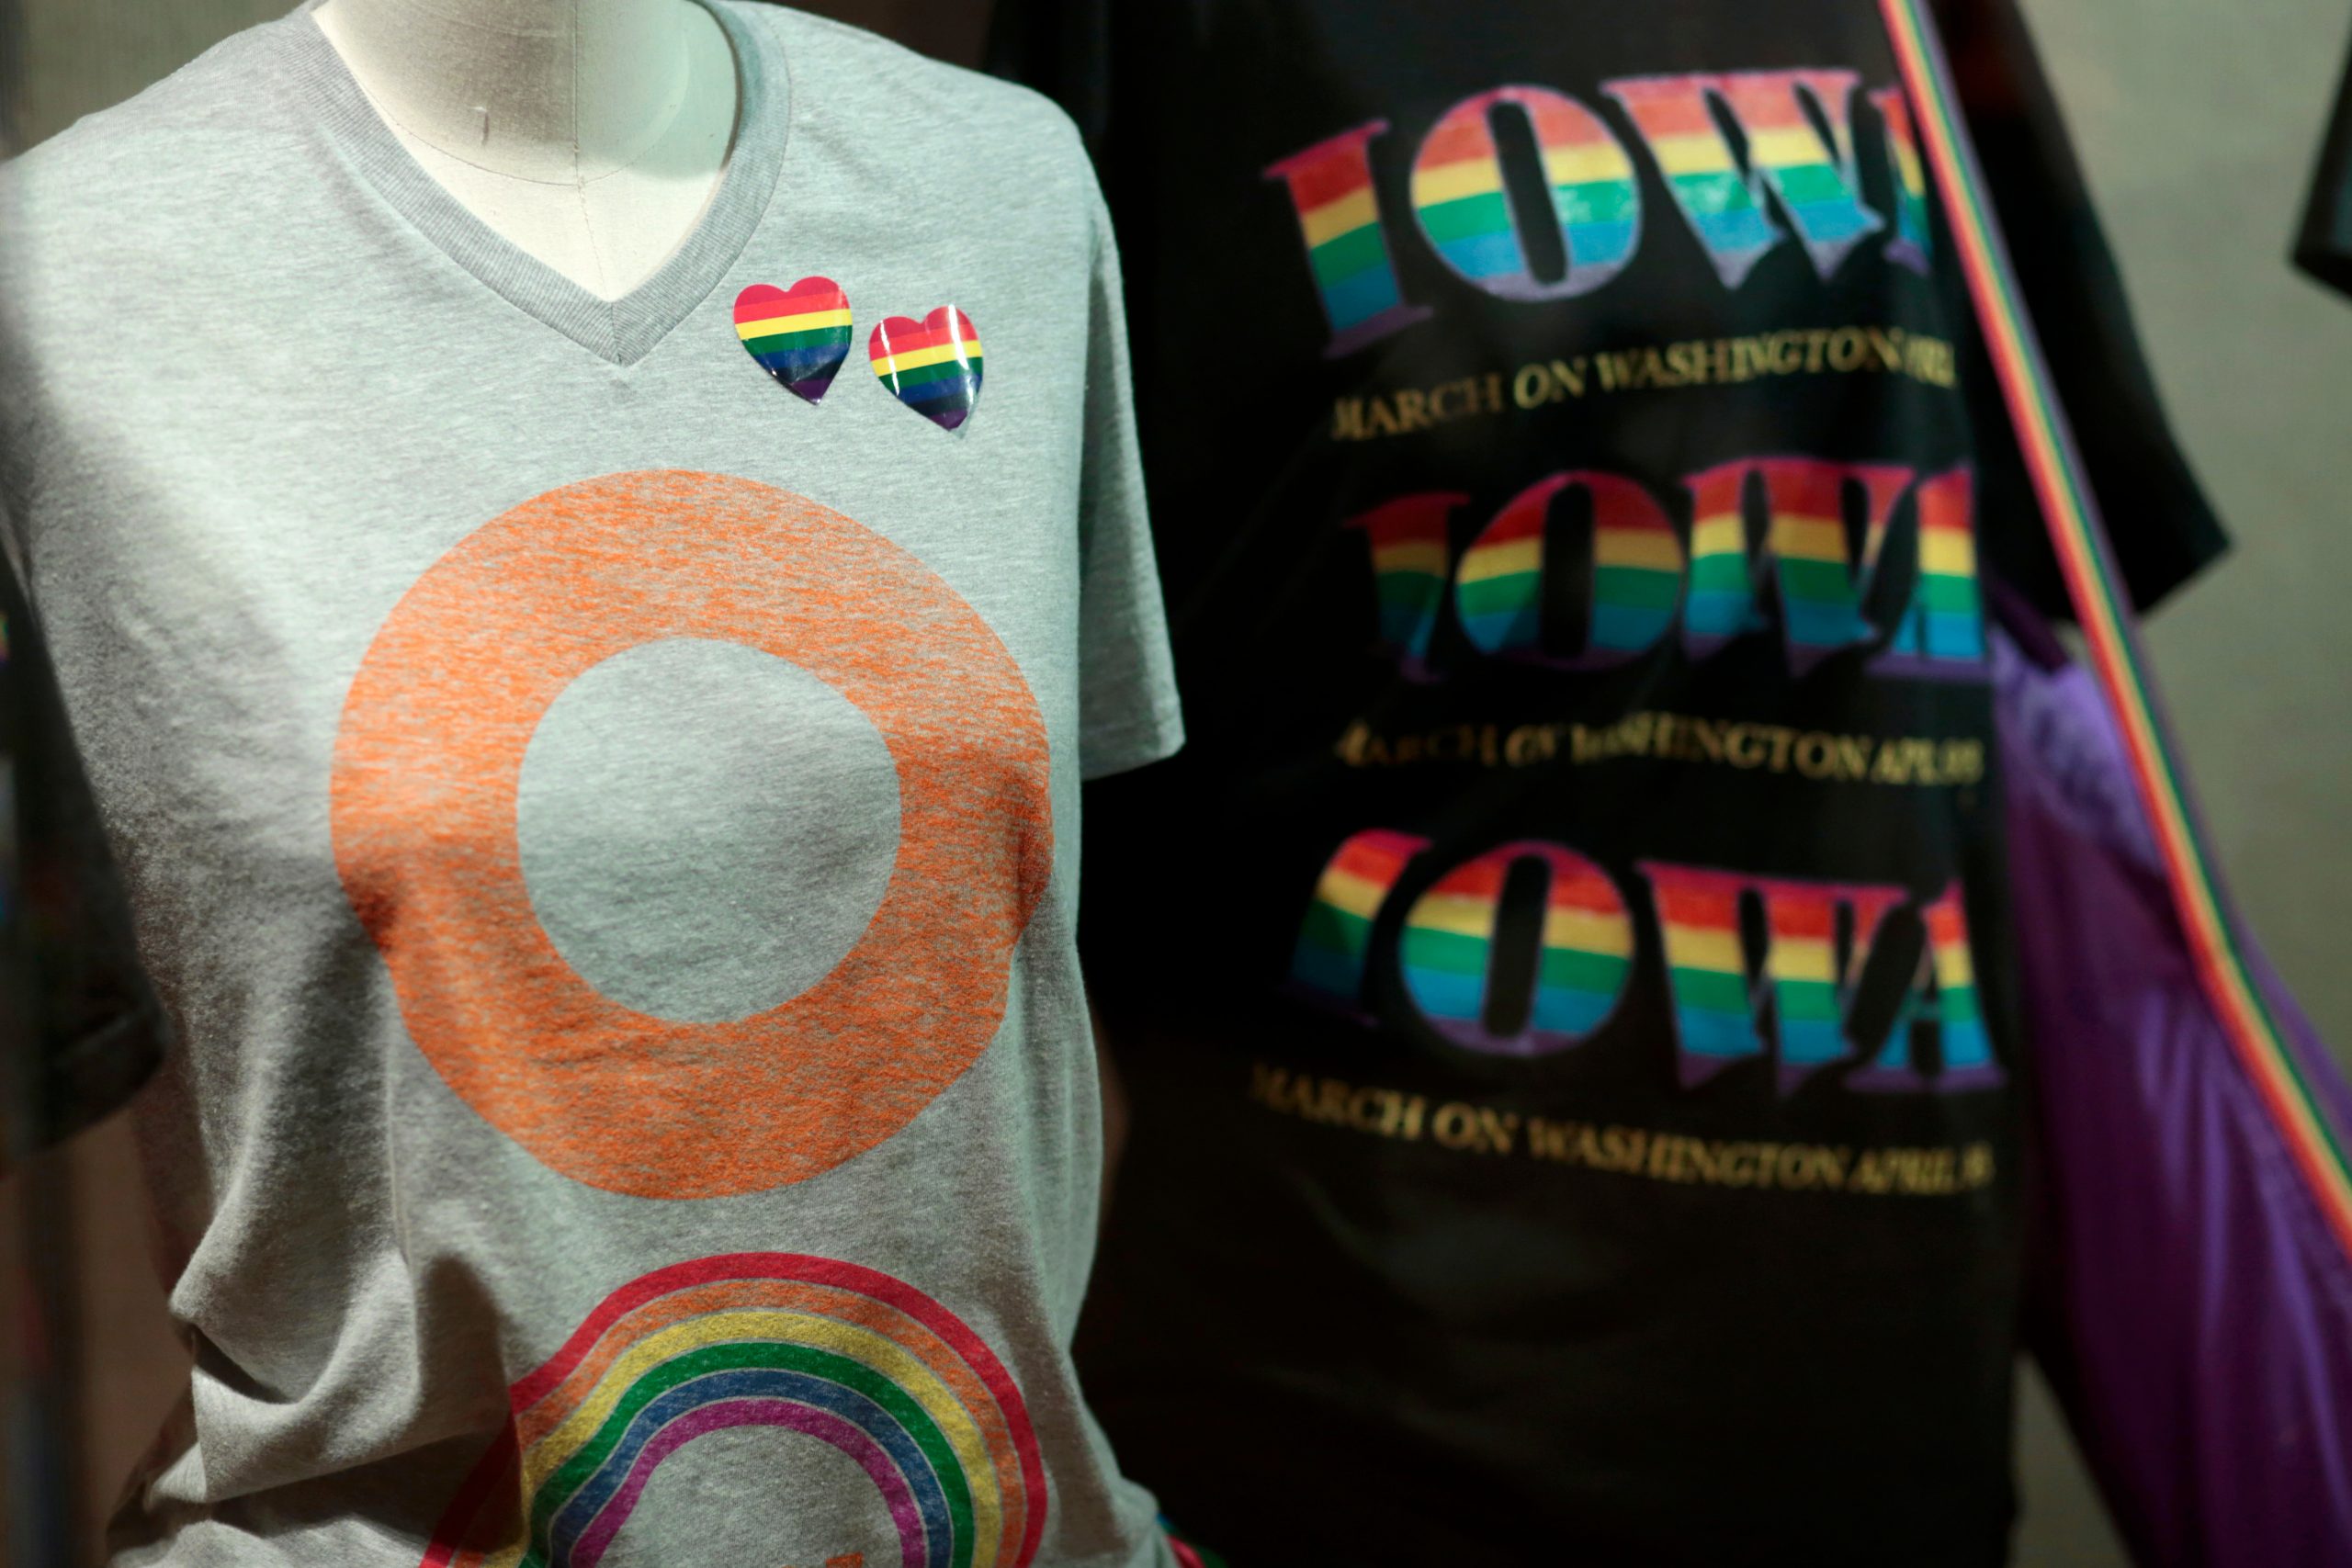 Two t-shirts from "Overtly Proud" showcased on dress forms.